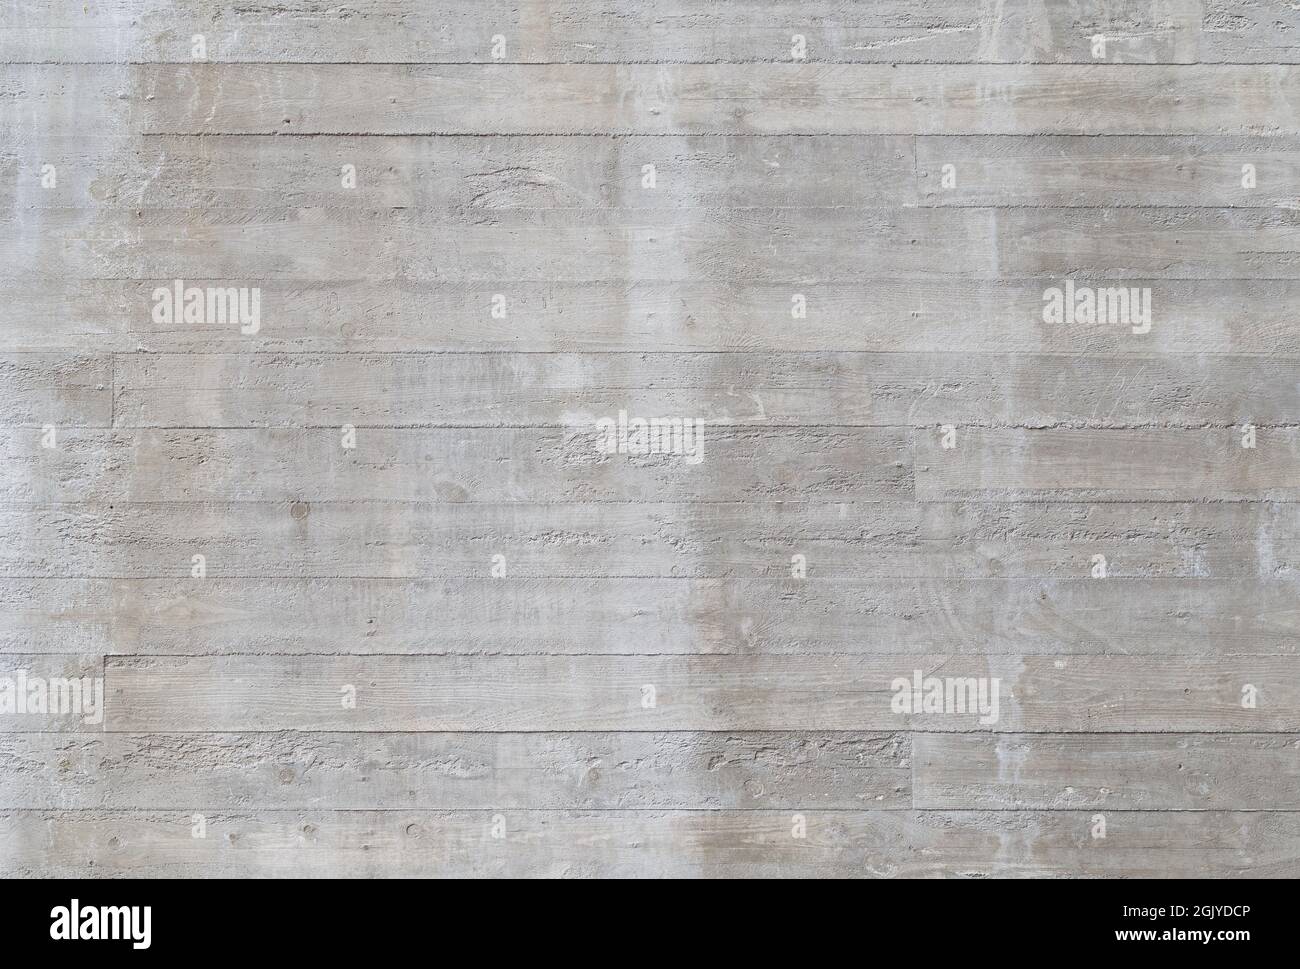 Front view of plain concrete wall. High resolution full frame textured background. Copy space. Stock Photo